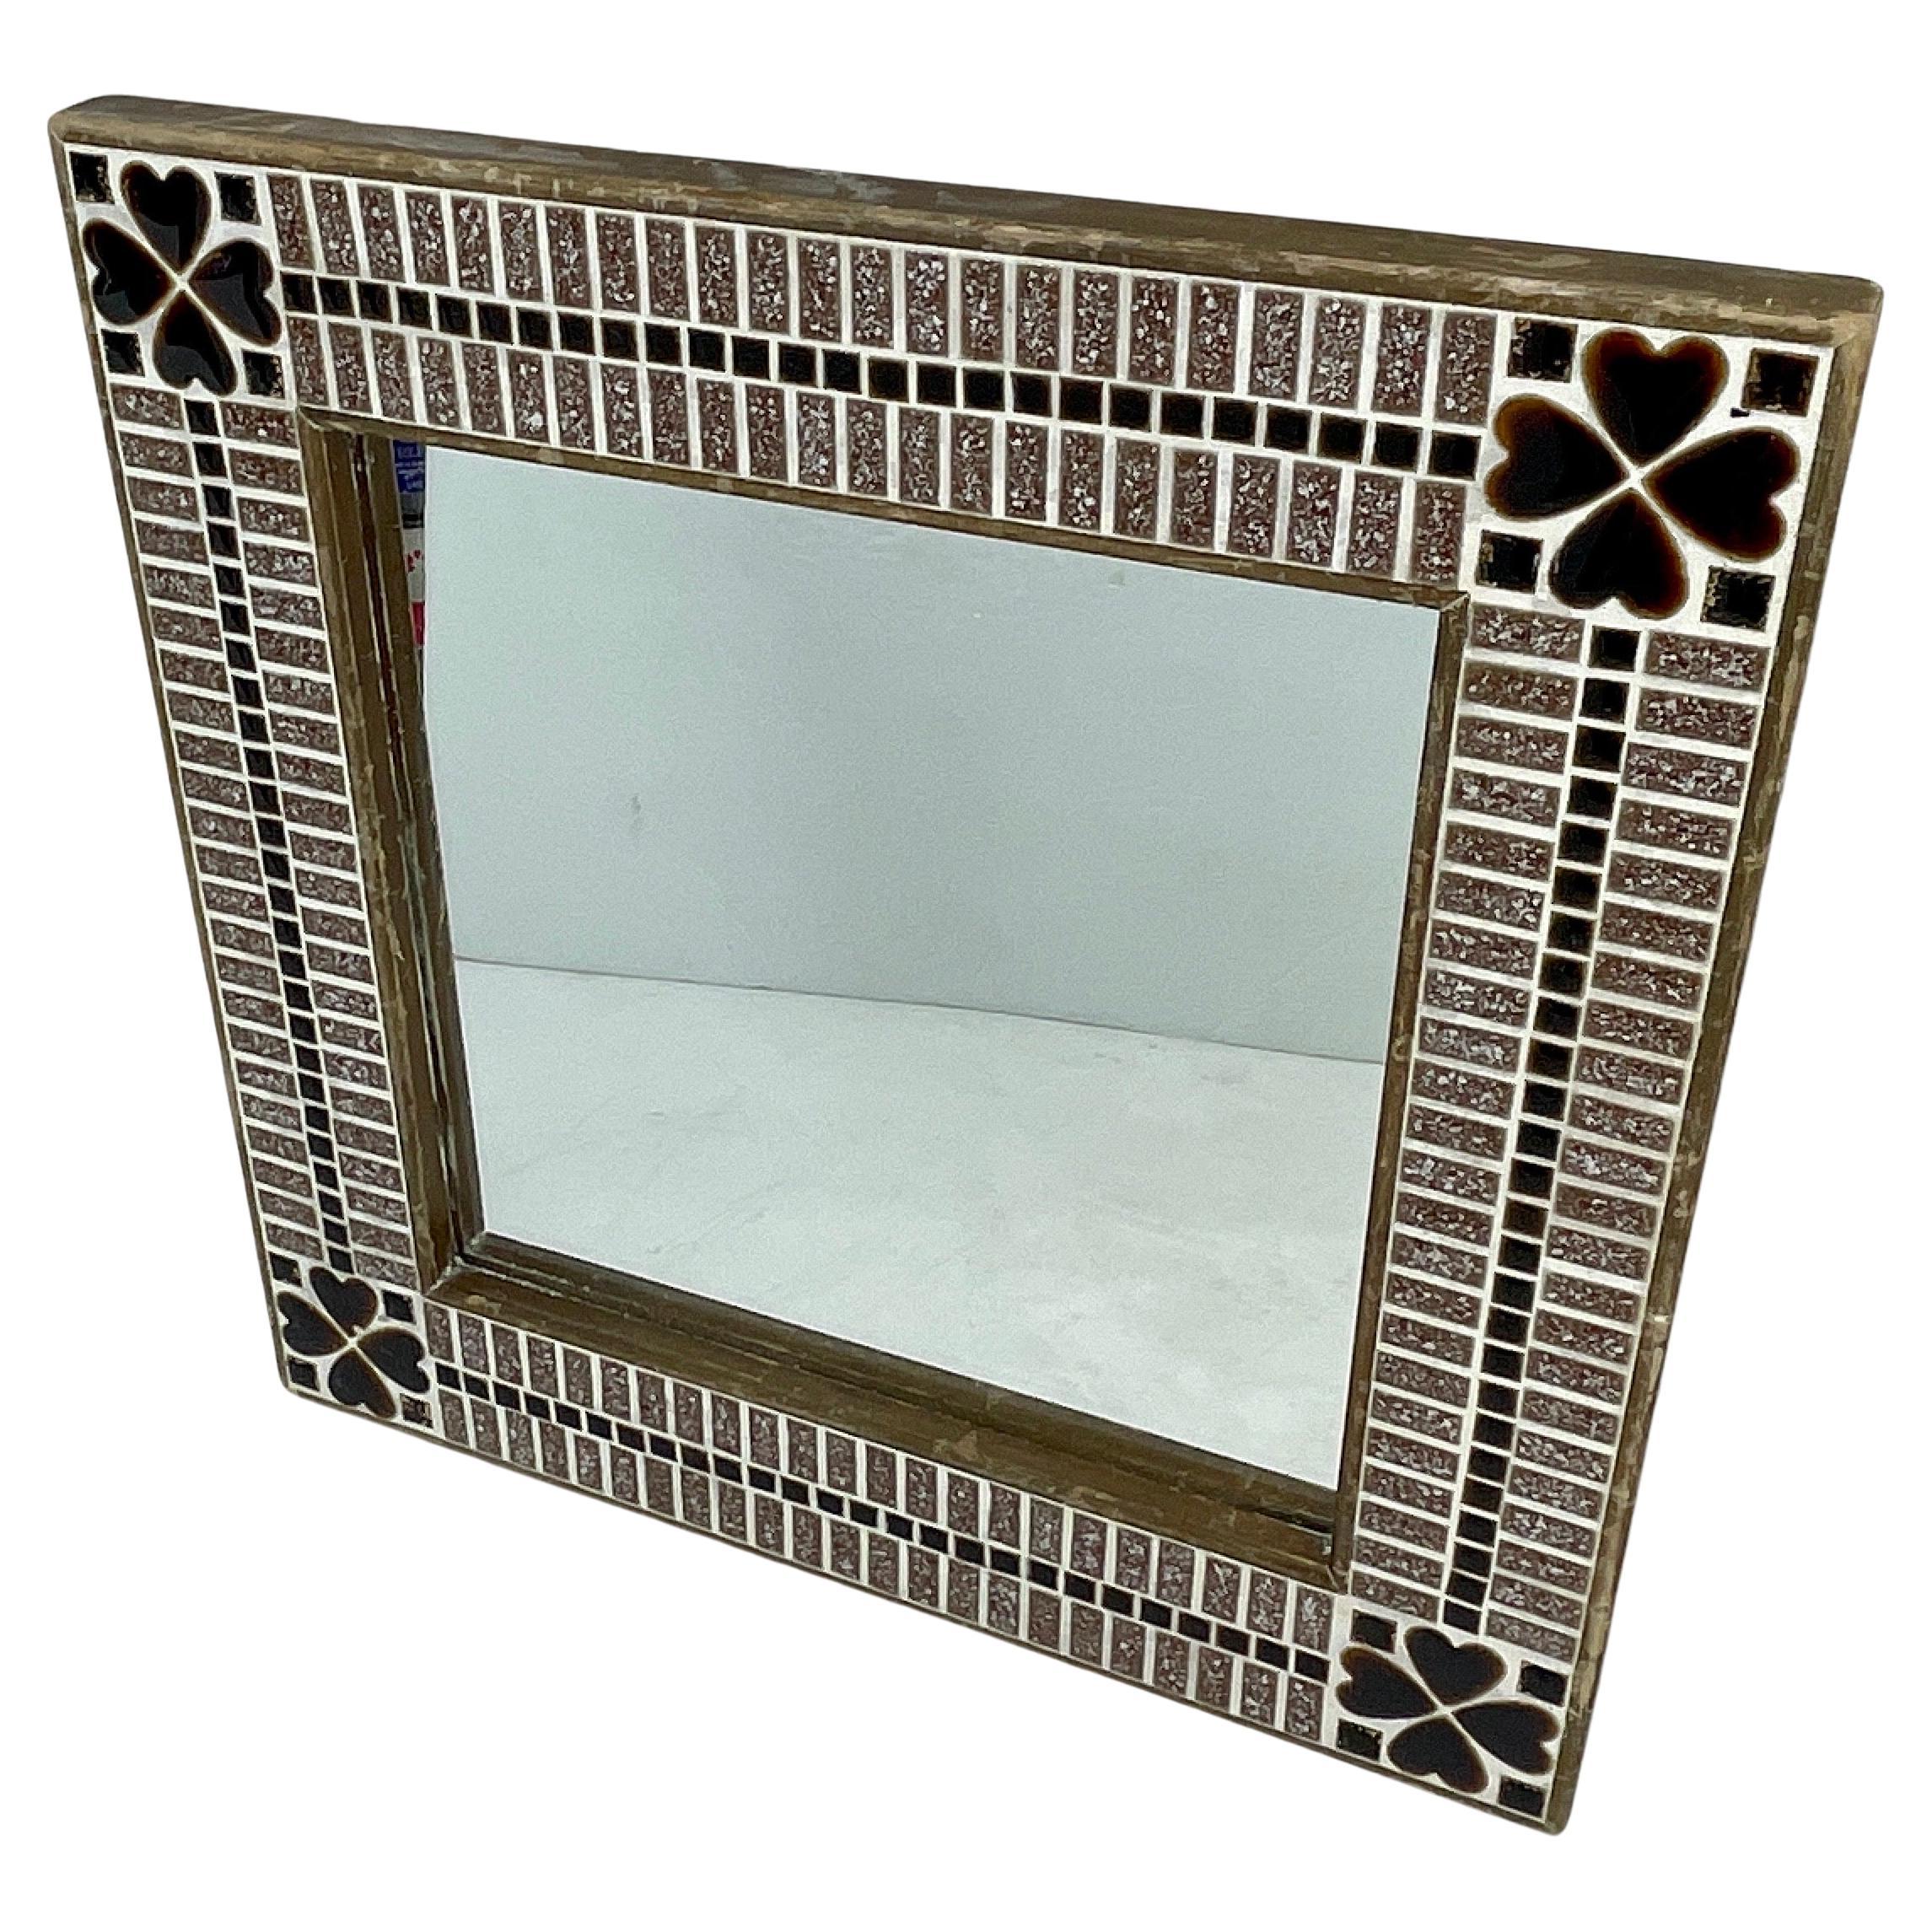 Square Mid-Century Modern tile mirror with heart decorations.